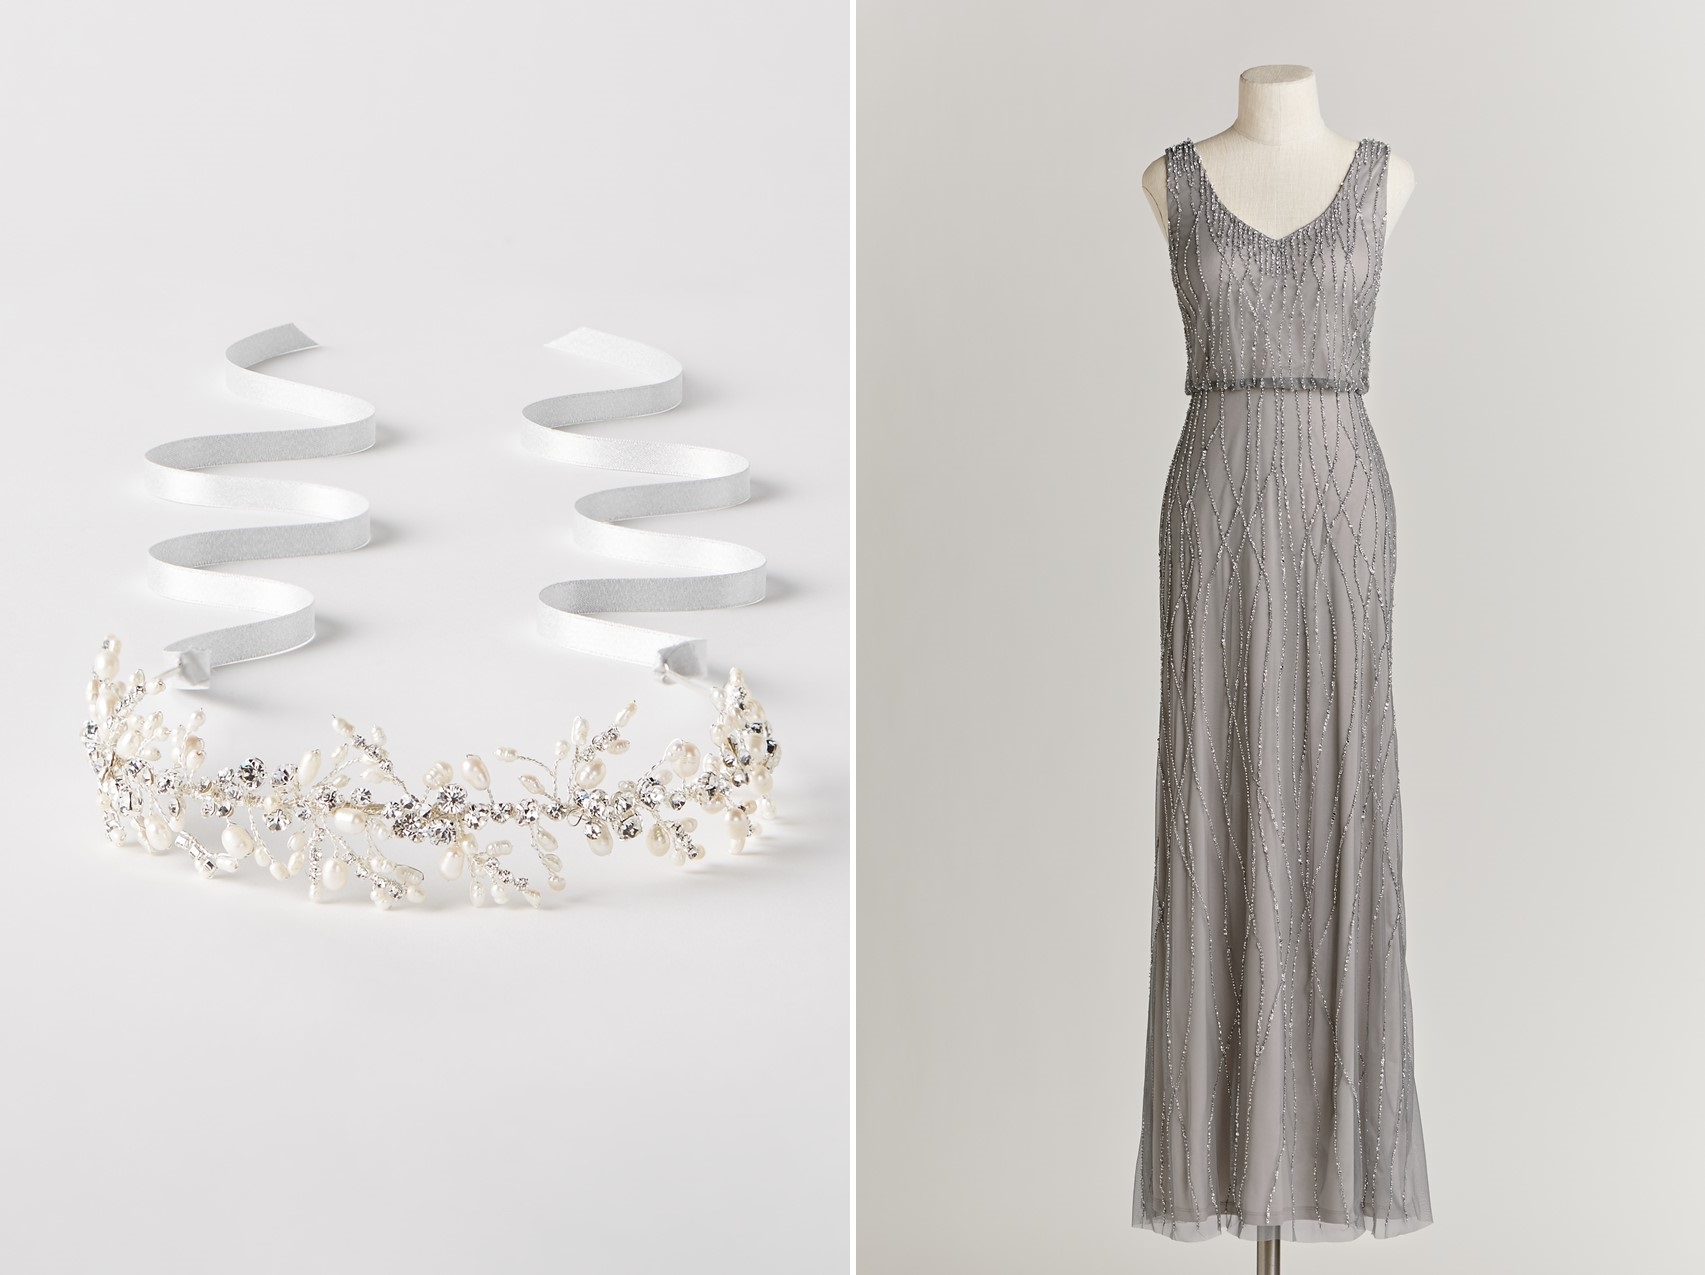 Effie Headband and Brooklyn Bridesmaid Dress from BHLDN's Stunning Fall 2015 Collection ‘Twice Enchanted’